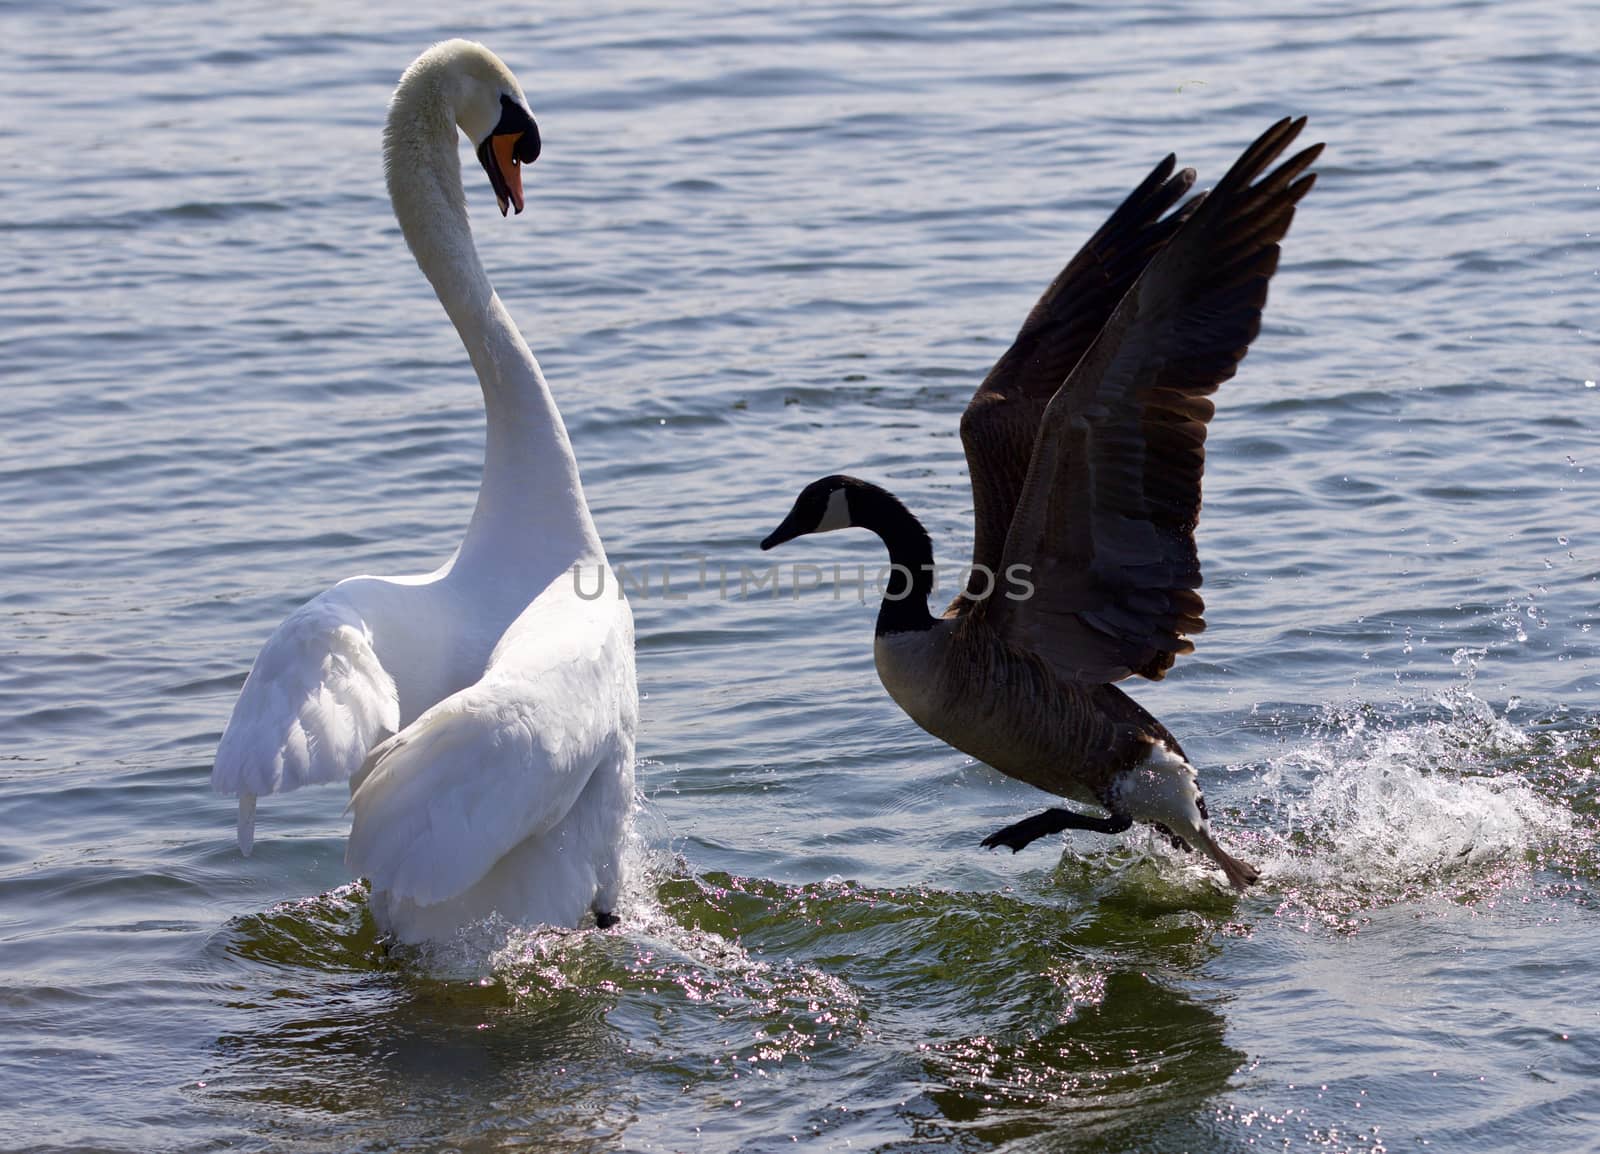 Amazing photo of the epic fight between the Canada goose and the swan